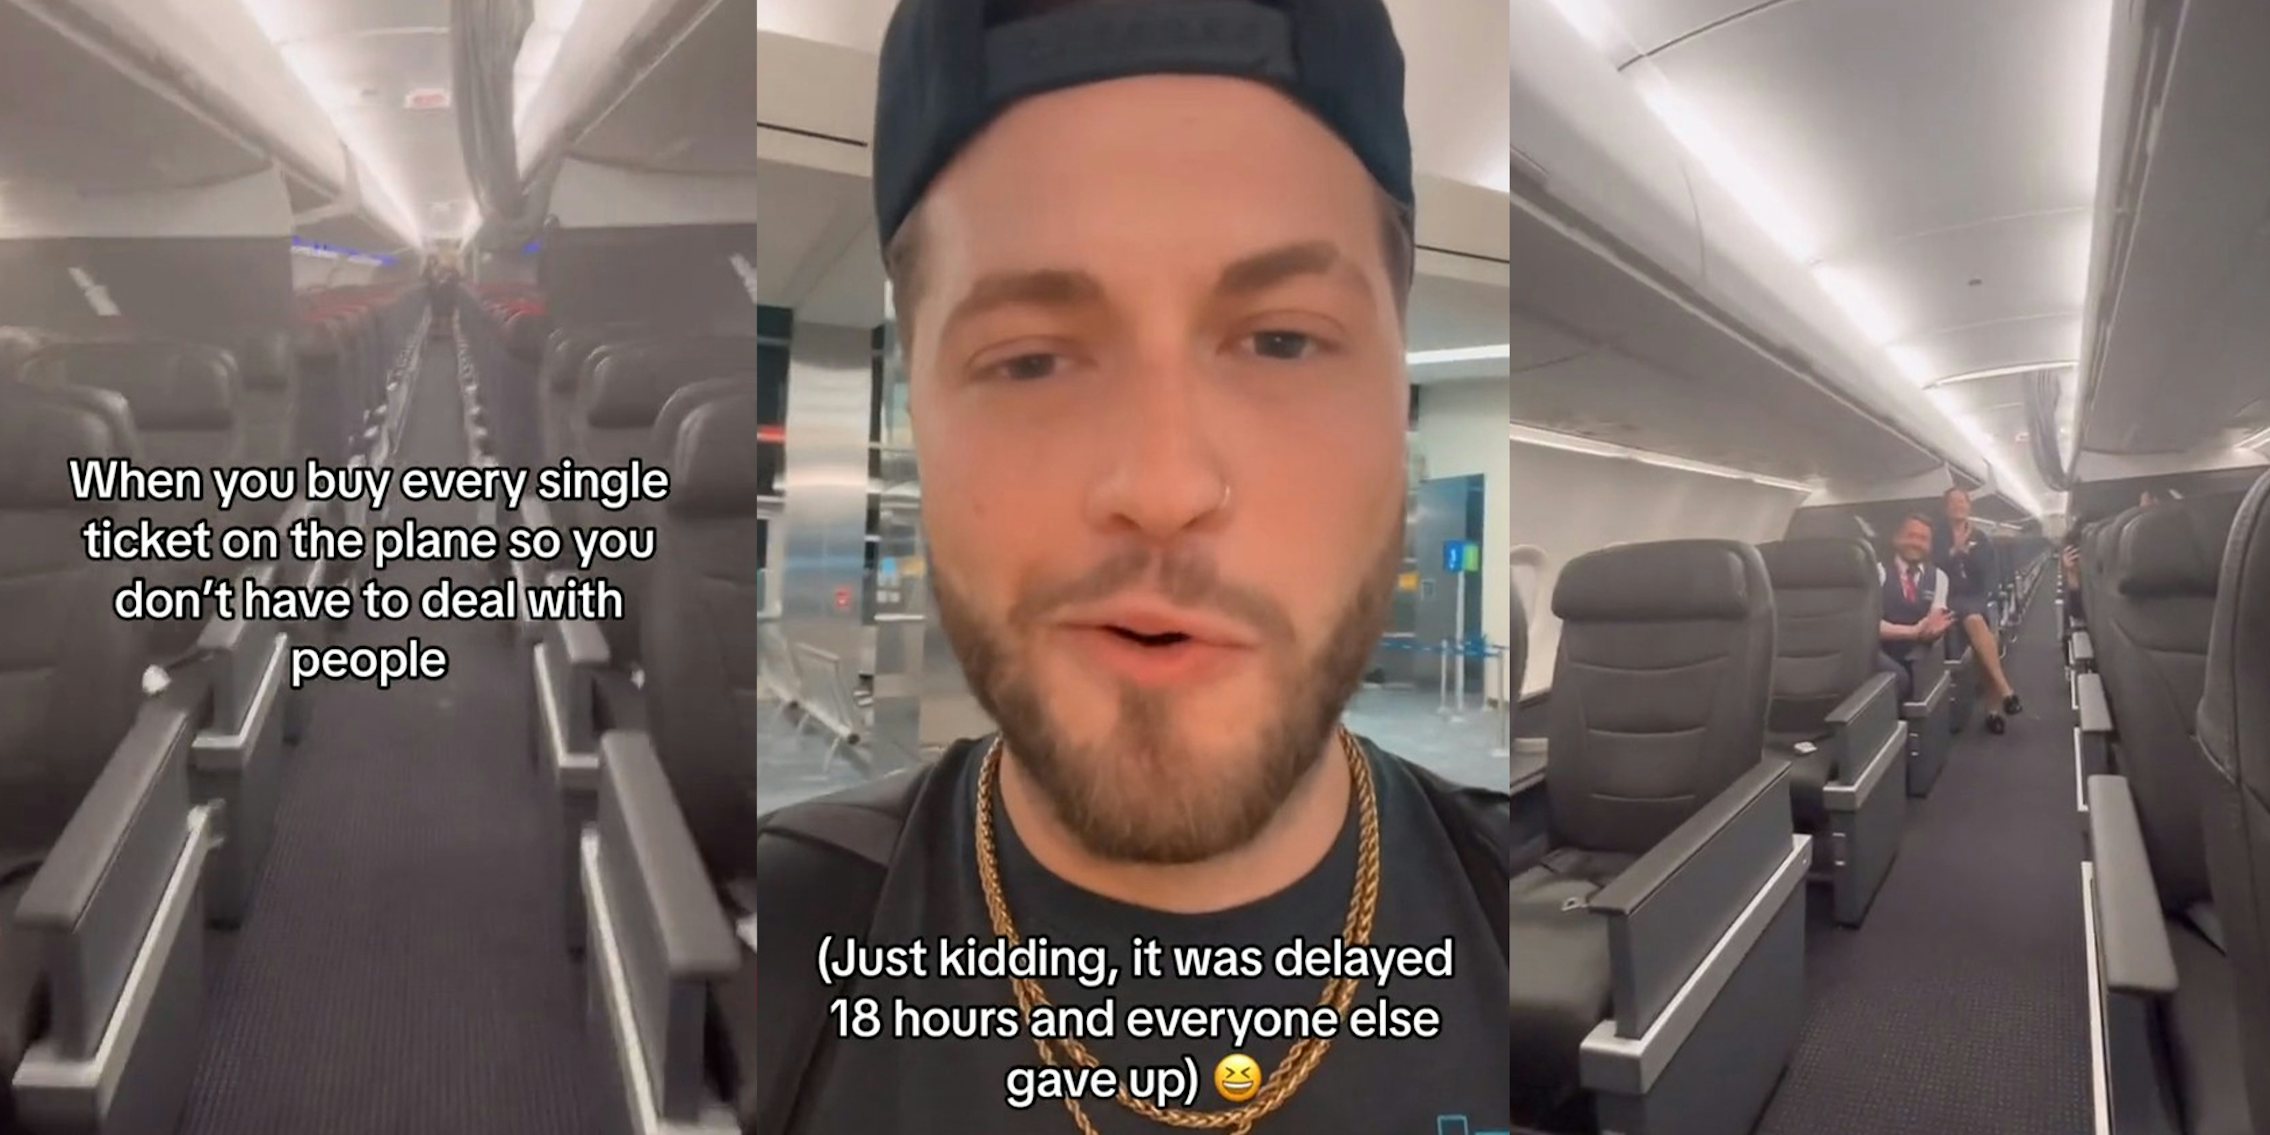 Passenger ends up being the only person on the flight after 18-hour delay. Everyone else gave up